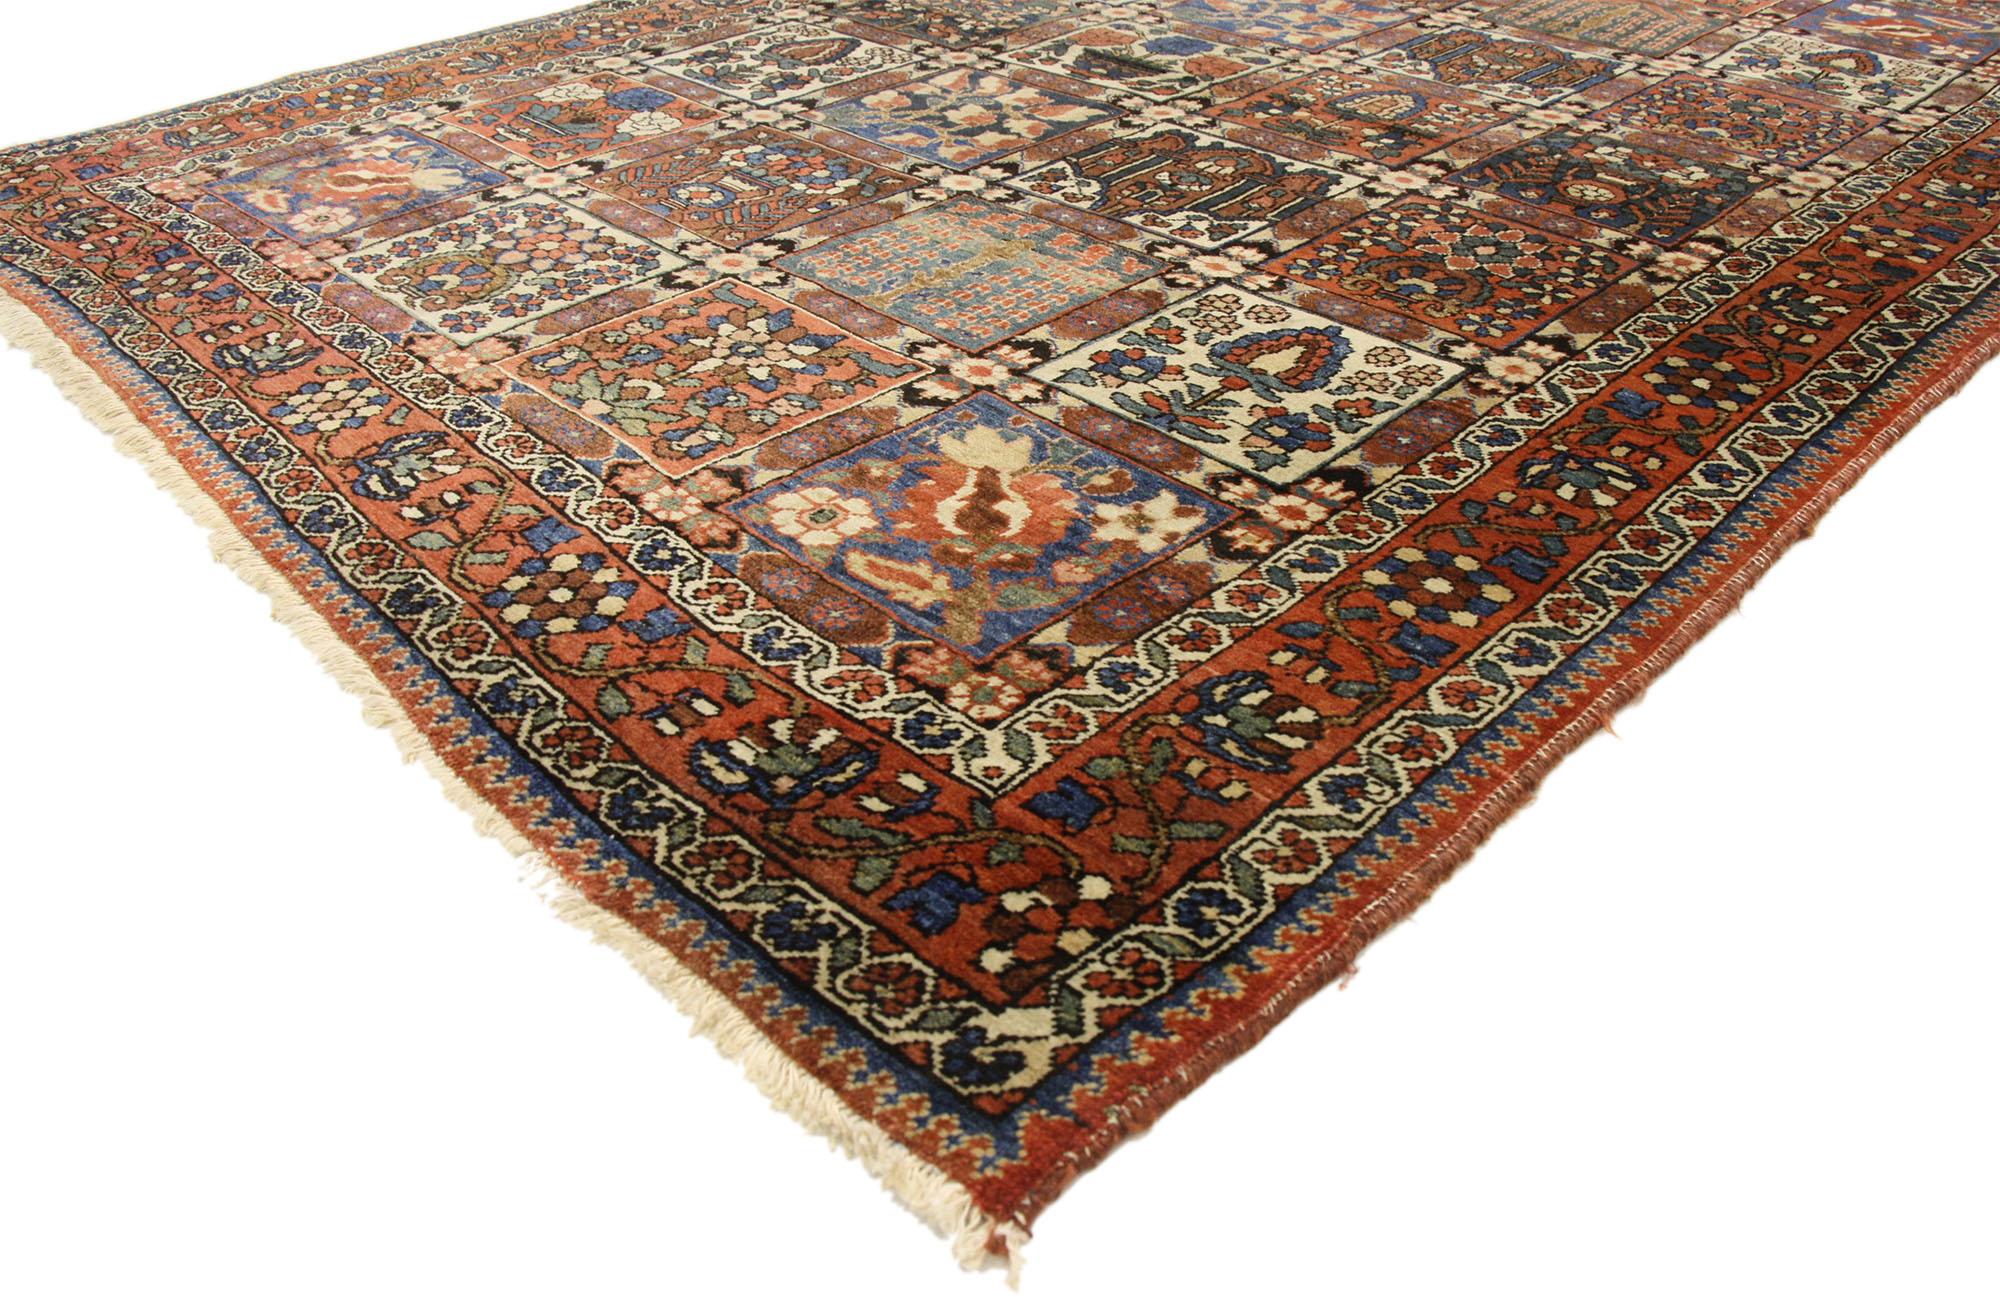 73282, rustic style antique Persian Bakhtiari rug with Four Seasons Garden design. Traditional colors integrated with an intimate patina, this antique Persian Bakhtiari rug features the Four Seasons Garden design. Classically composed and boasting a